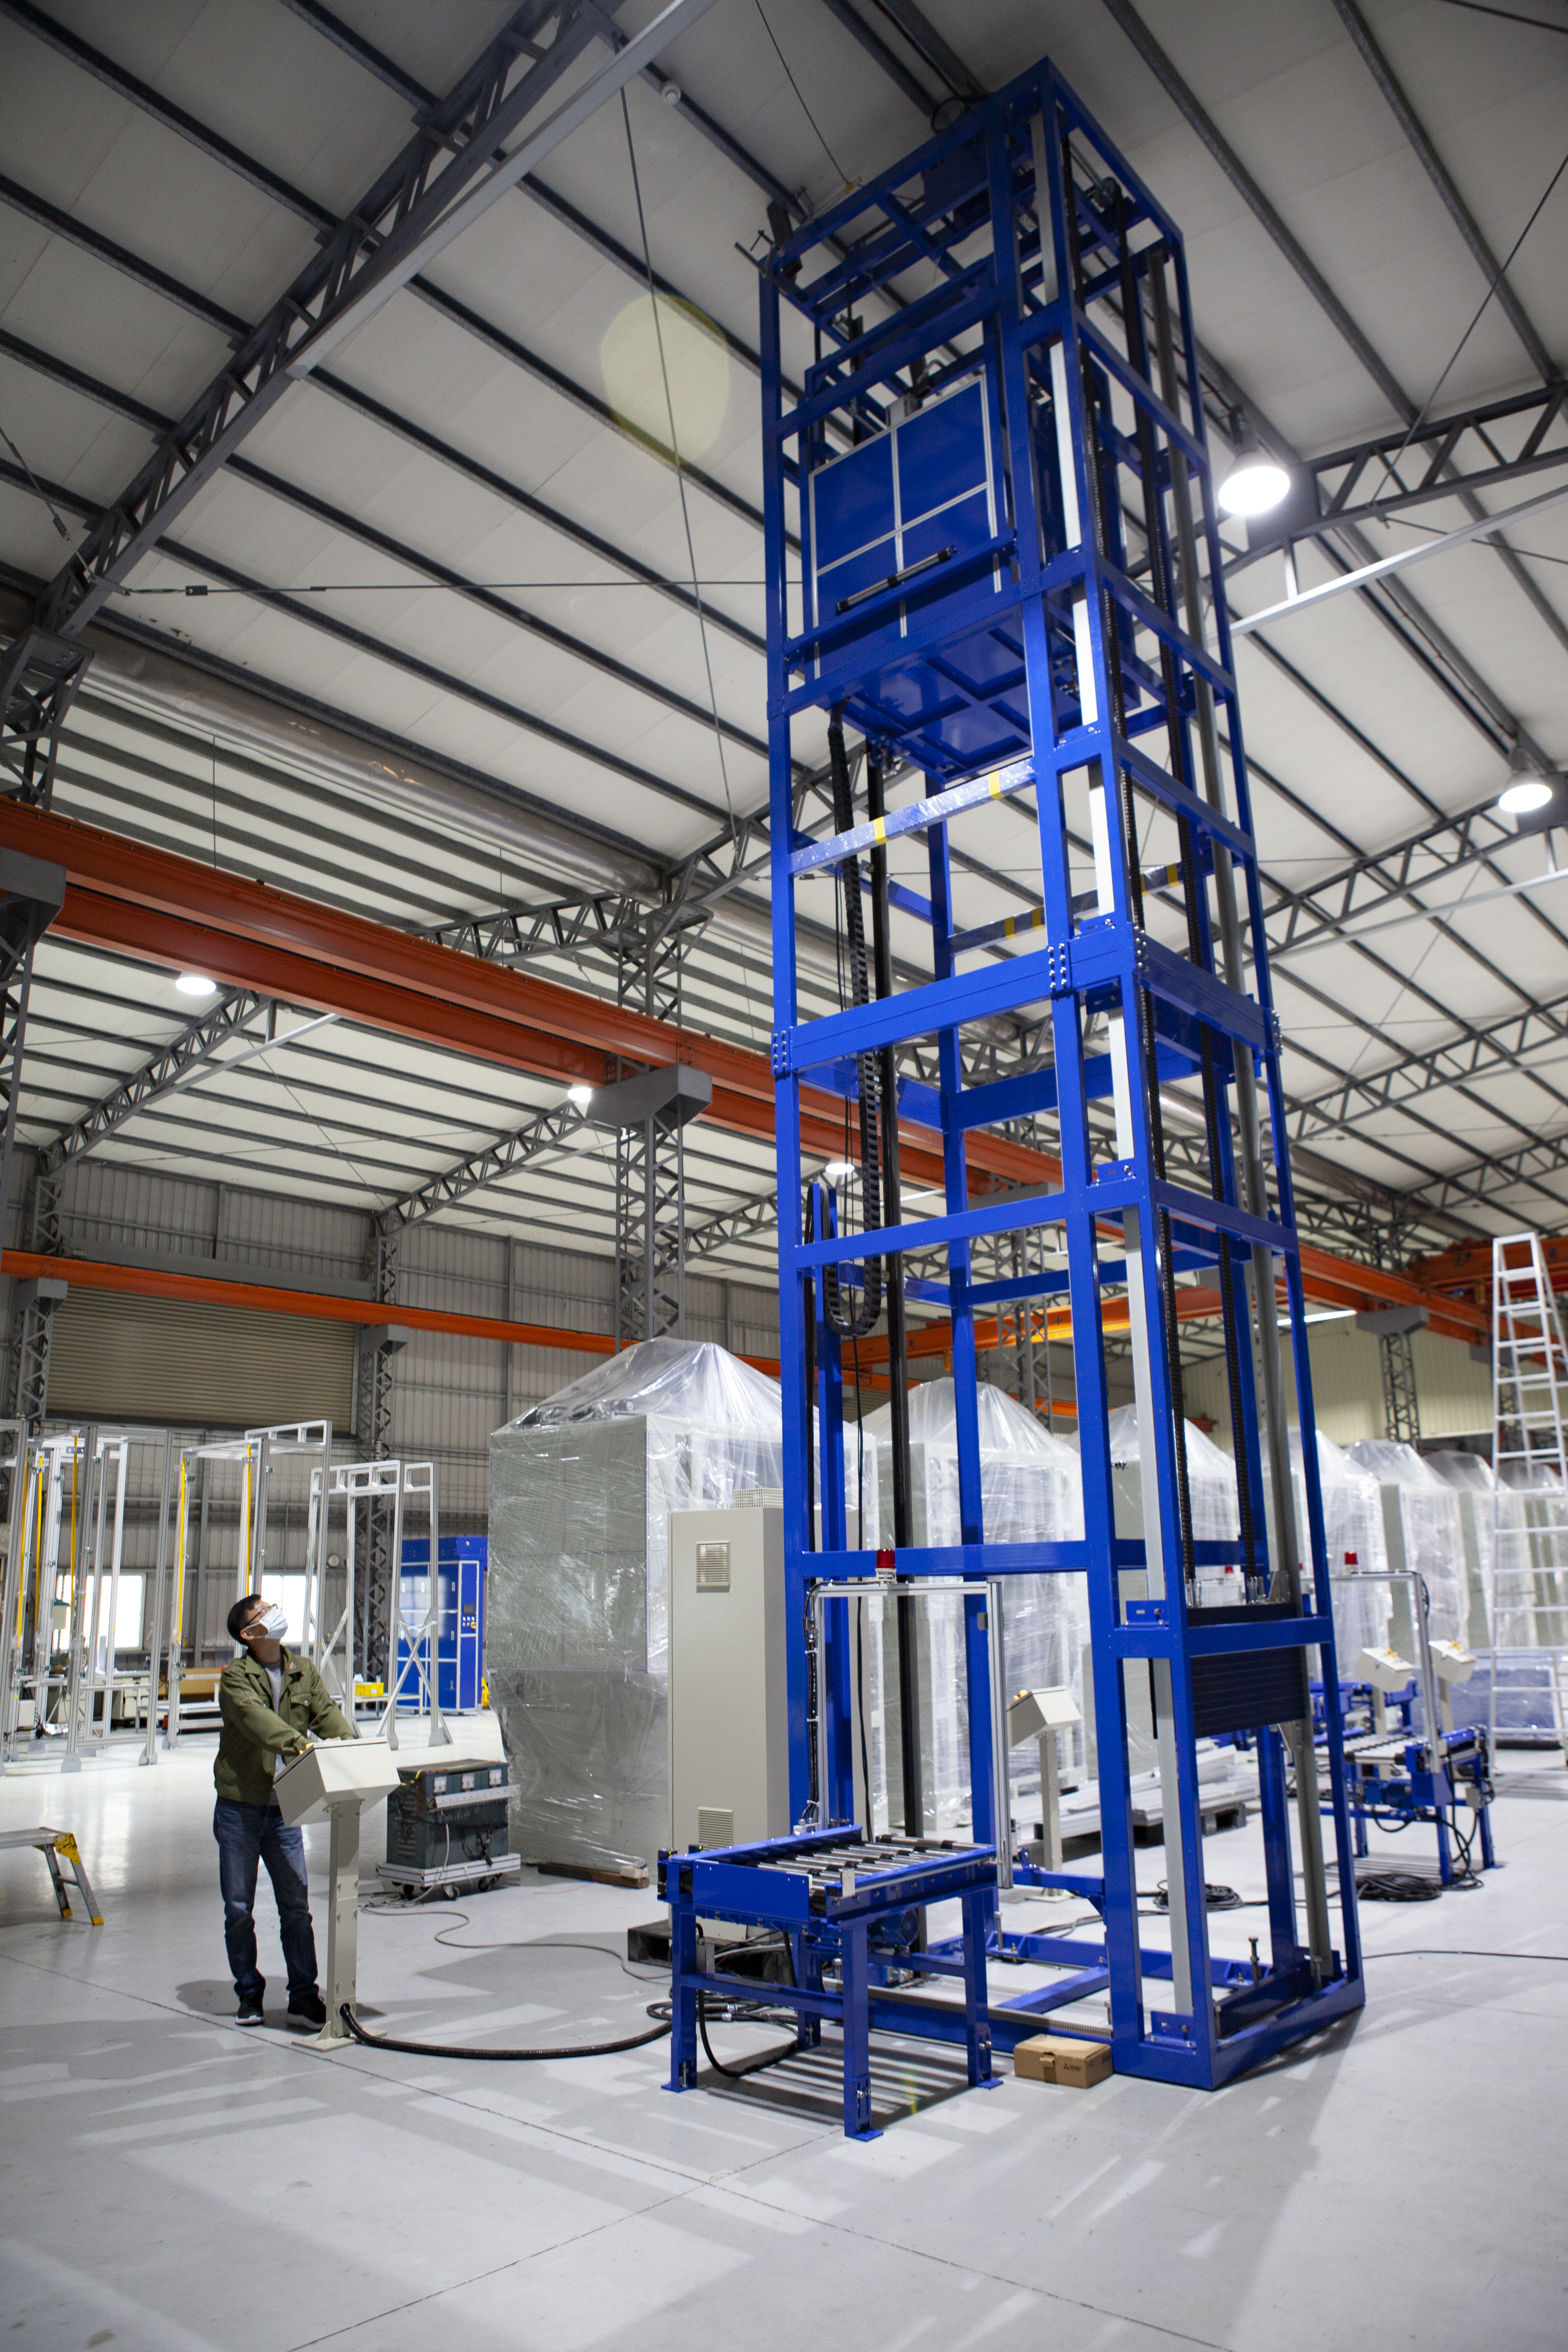 VRC lifts, also known as VRC elevators or reciprocating conveyors, are an efficient and cost-effective solution for transporting materials between different levels in industrial and commercial settings.